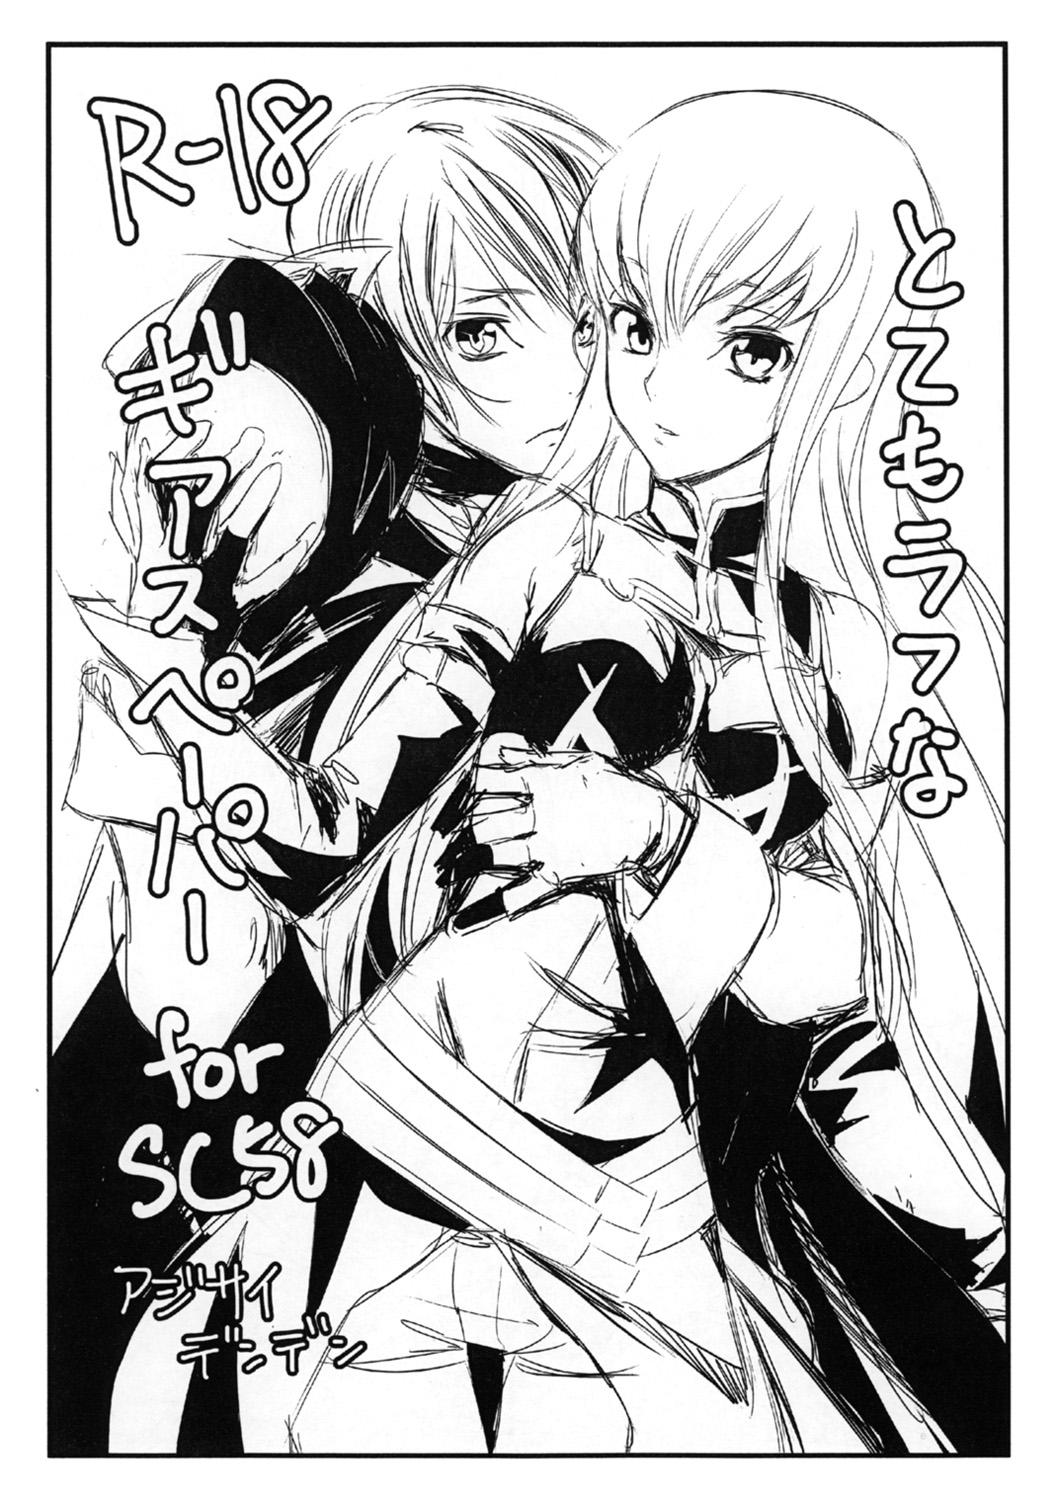 Hard Fuck Totemo Rough na Geass Paper for SC58 - Code geass Bear - Picture 1